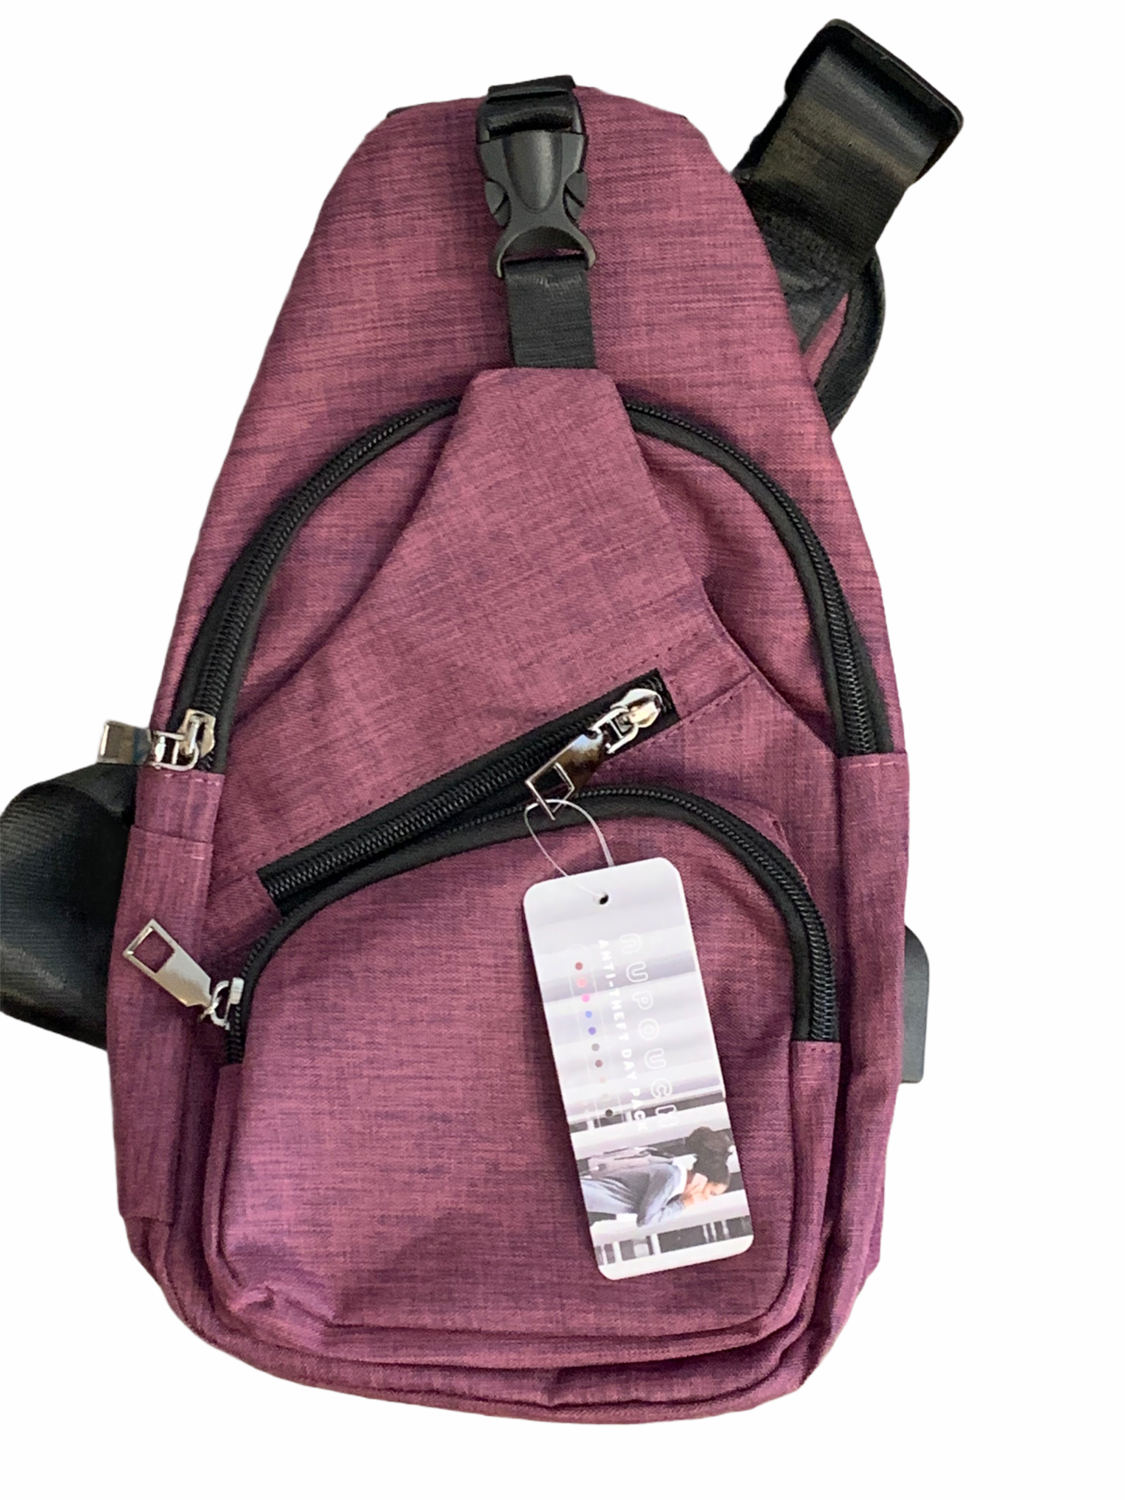 P&L- Tahoe Day Pack Sling